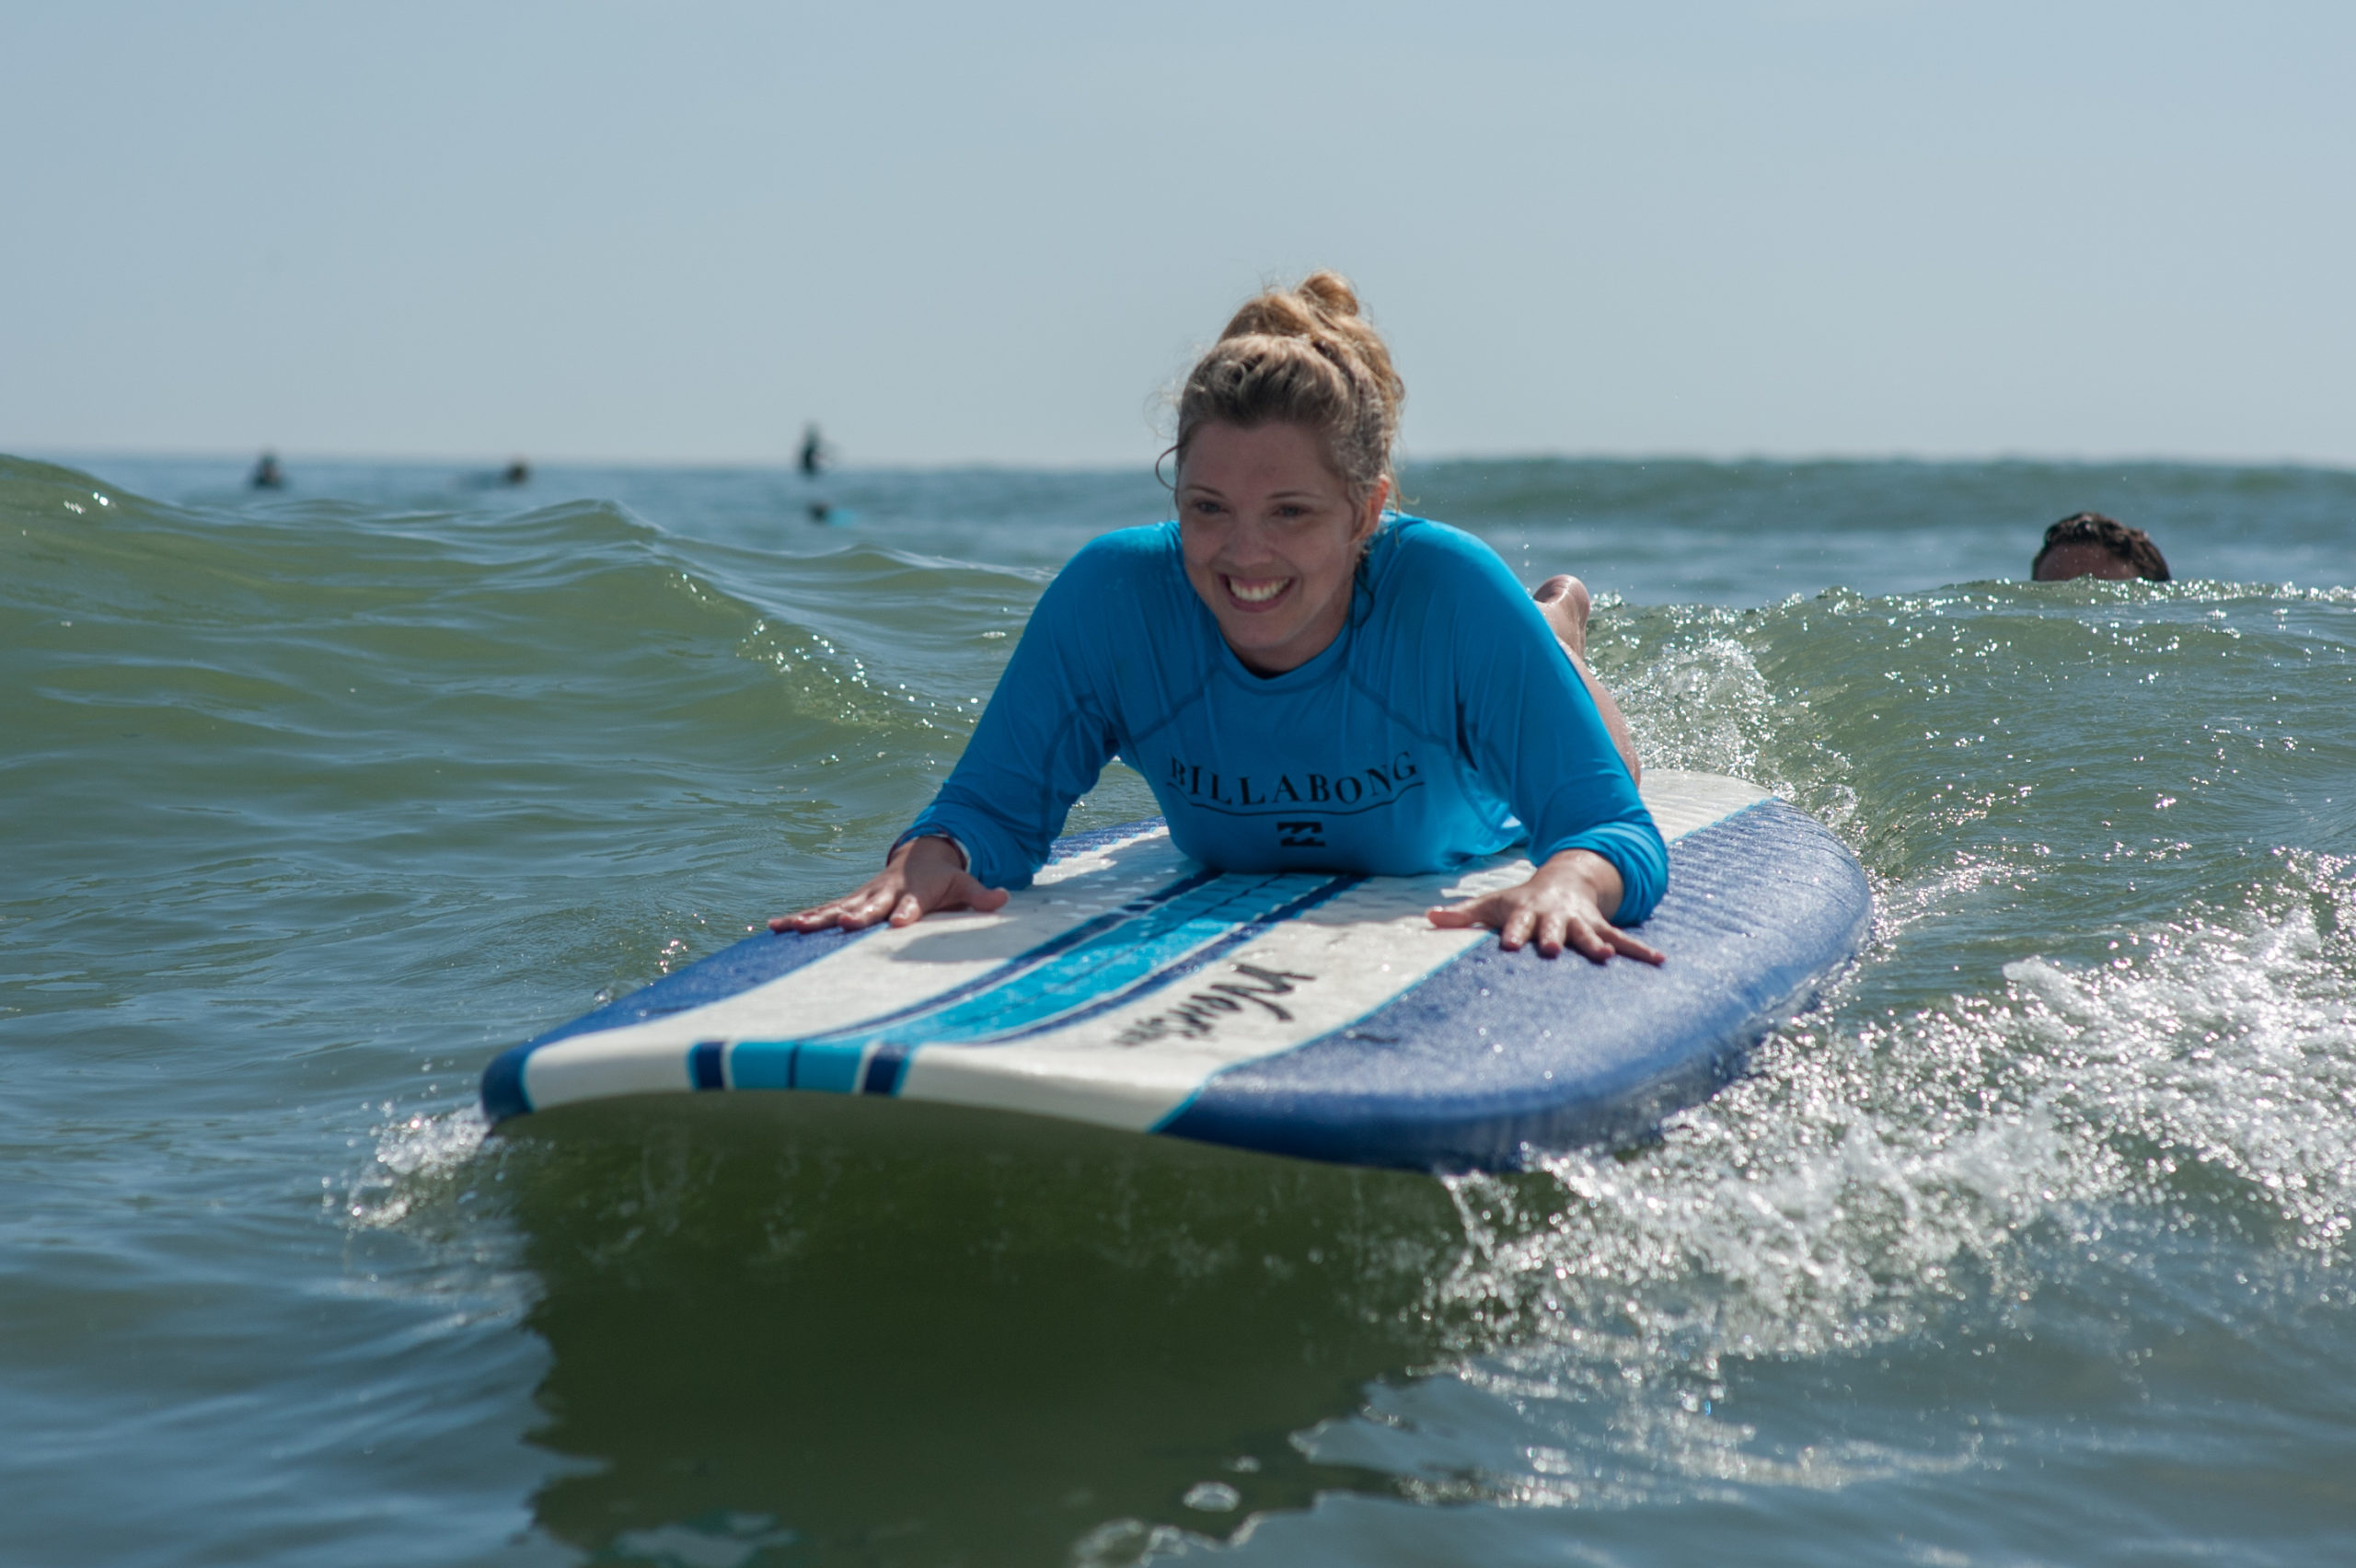 Female athlete laying on her stomach on her surfboard in the water